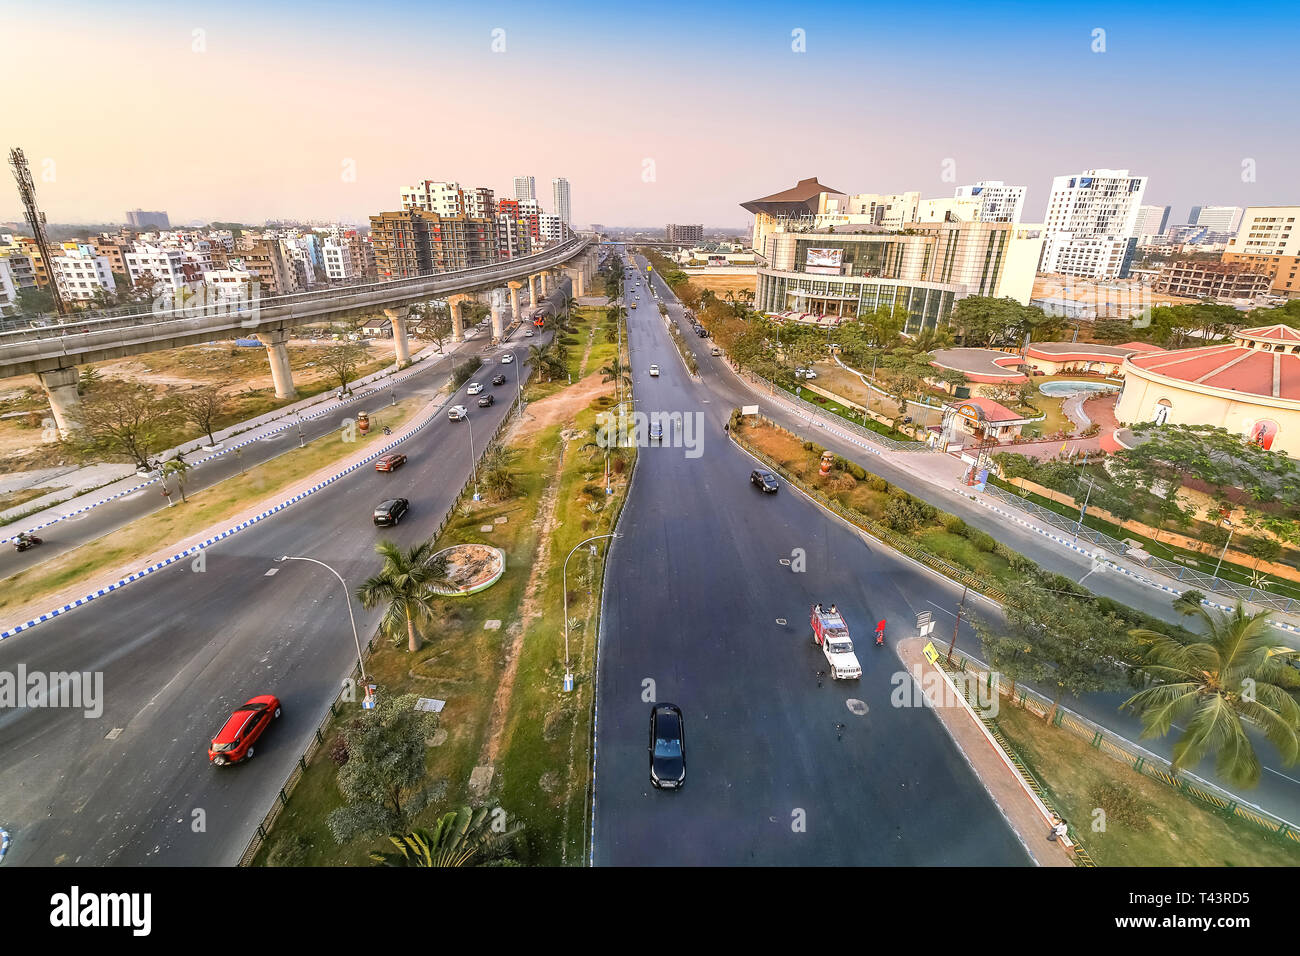 India city aerial view with highway road residential and commercial buildings with view of over bridge and city traffic at sunset Stock Photo